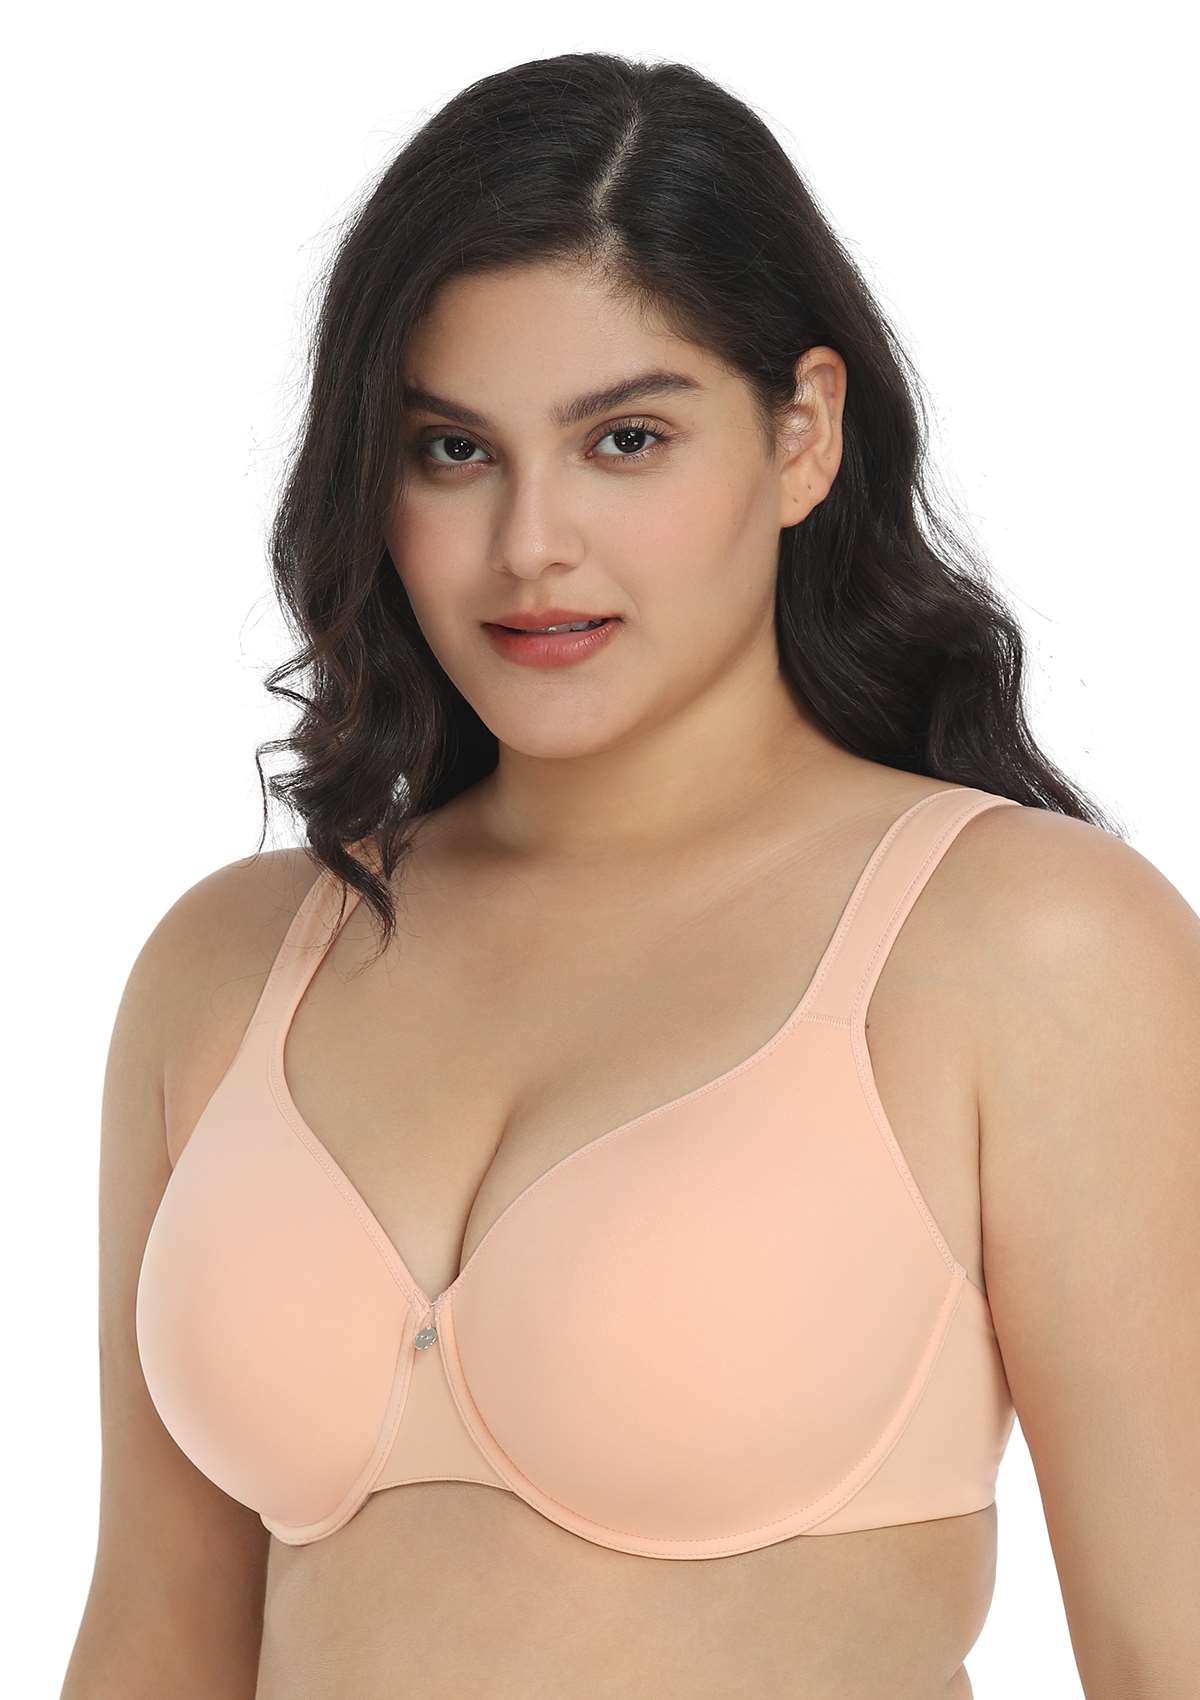 HSIA Patricia Smooth Classic T-shirt Lightly Padded Minimizer Bra - Light Pink / 38 / H